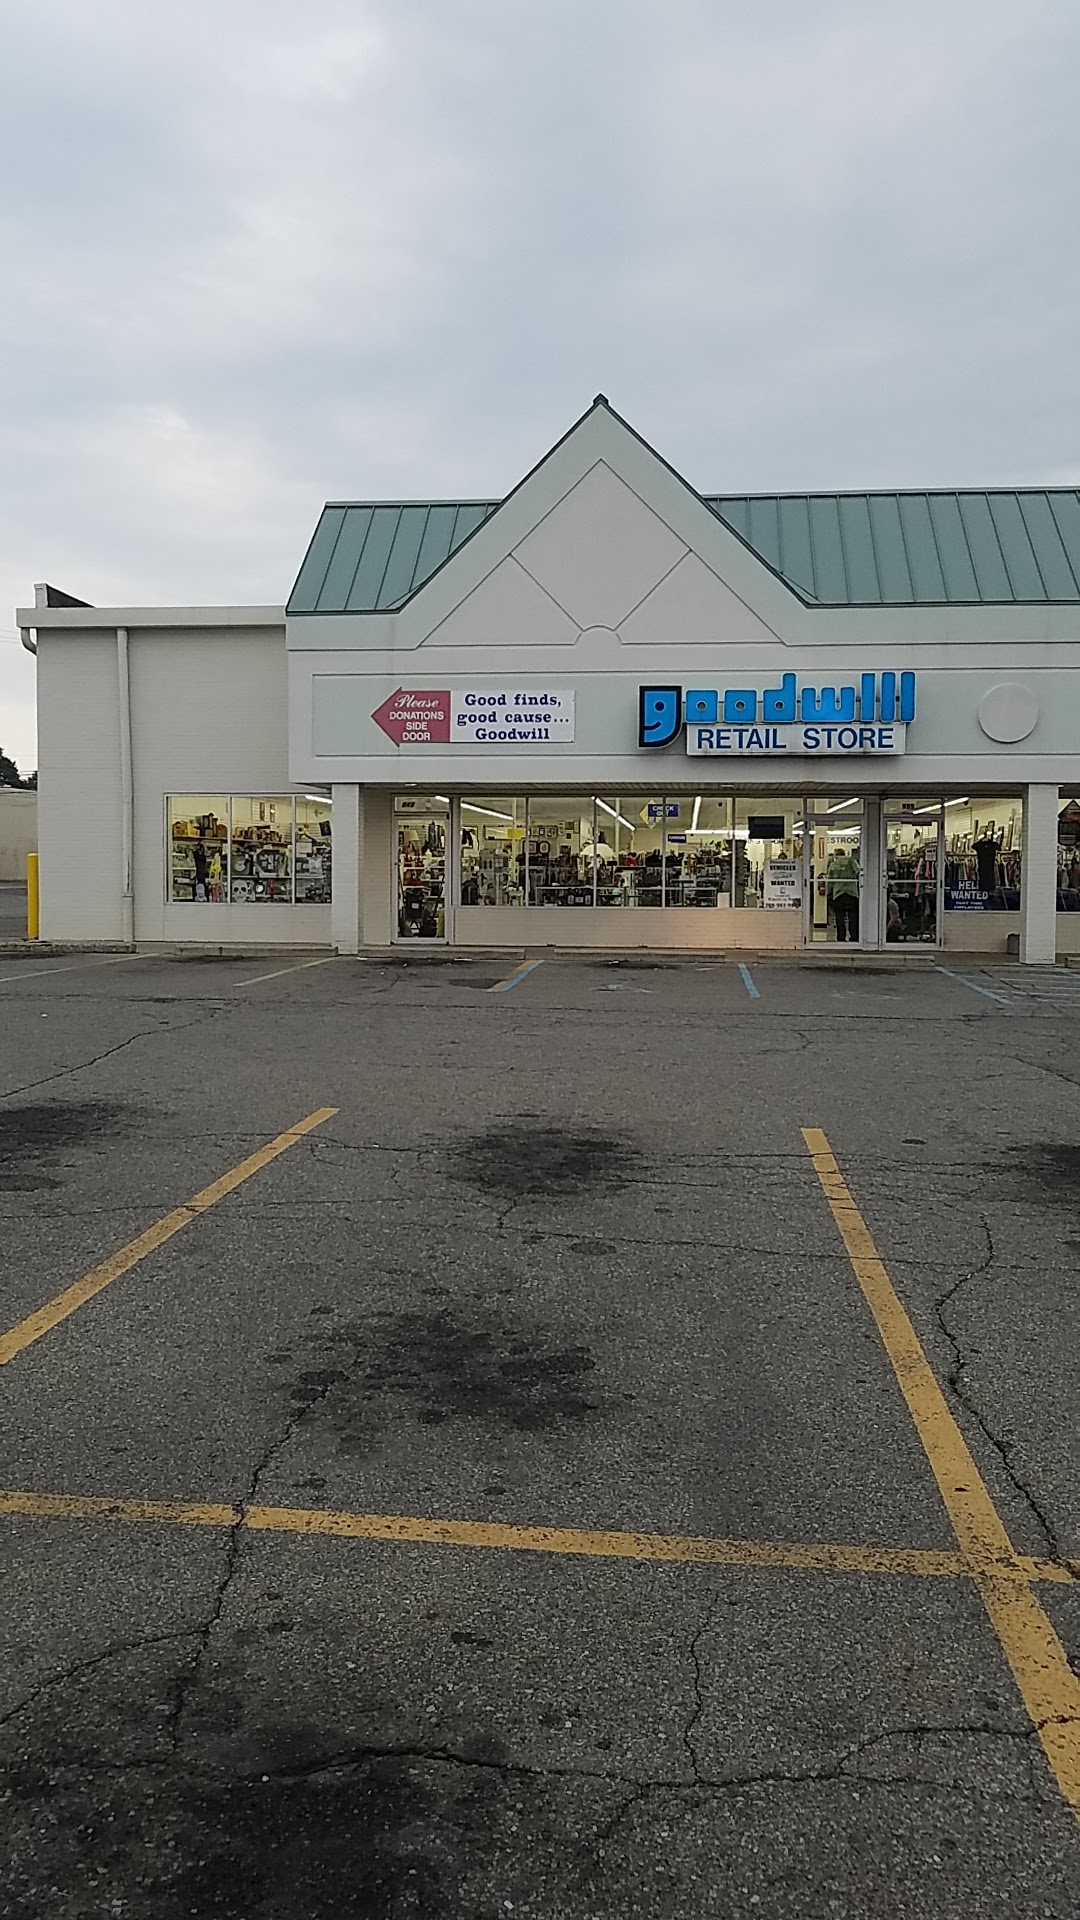 Goodwill Industries of Central Michigan's Heartland